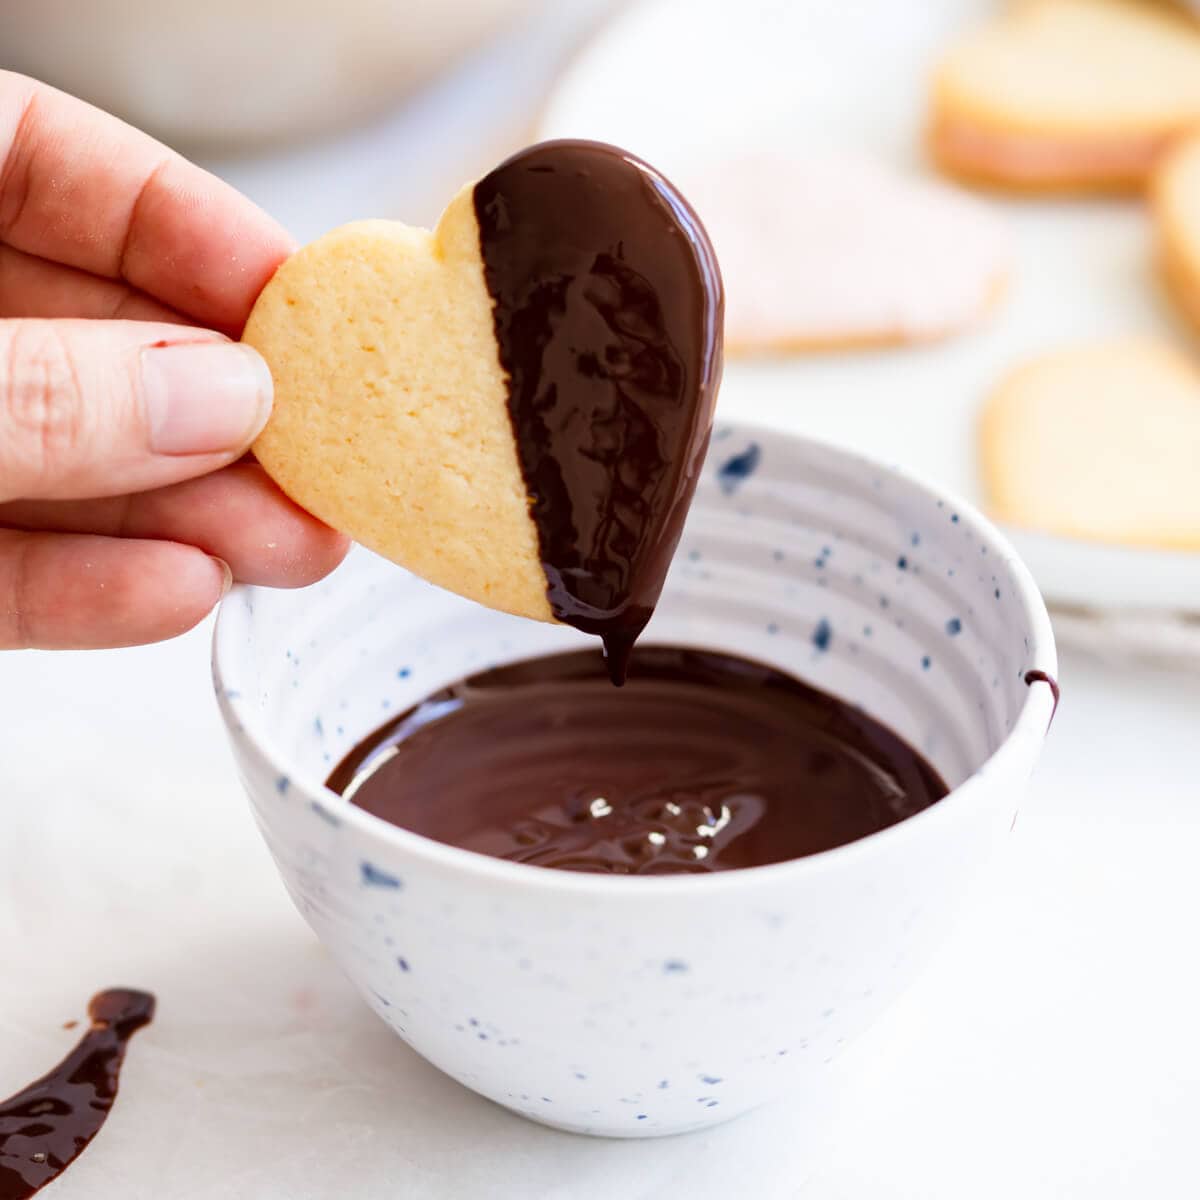 heart-shaped sugar cookie being dipped in melted chocolate.